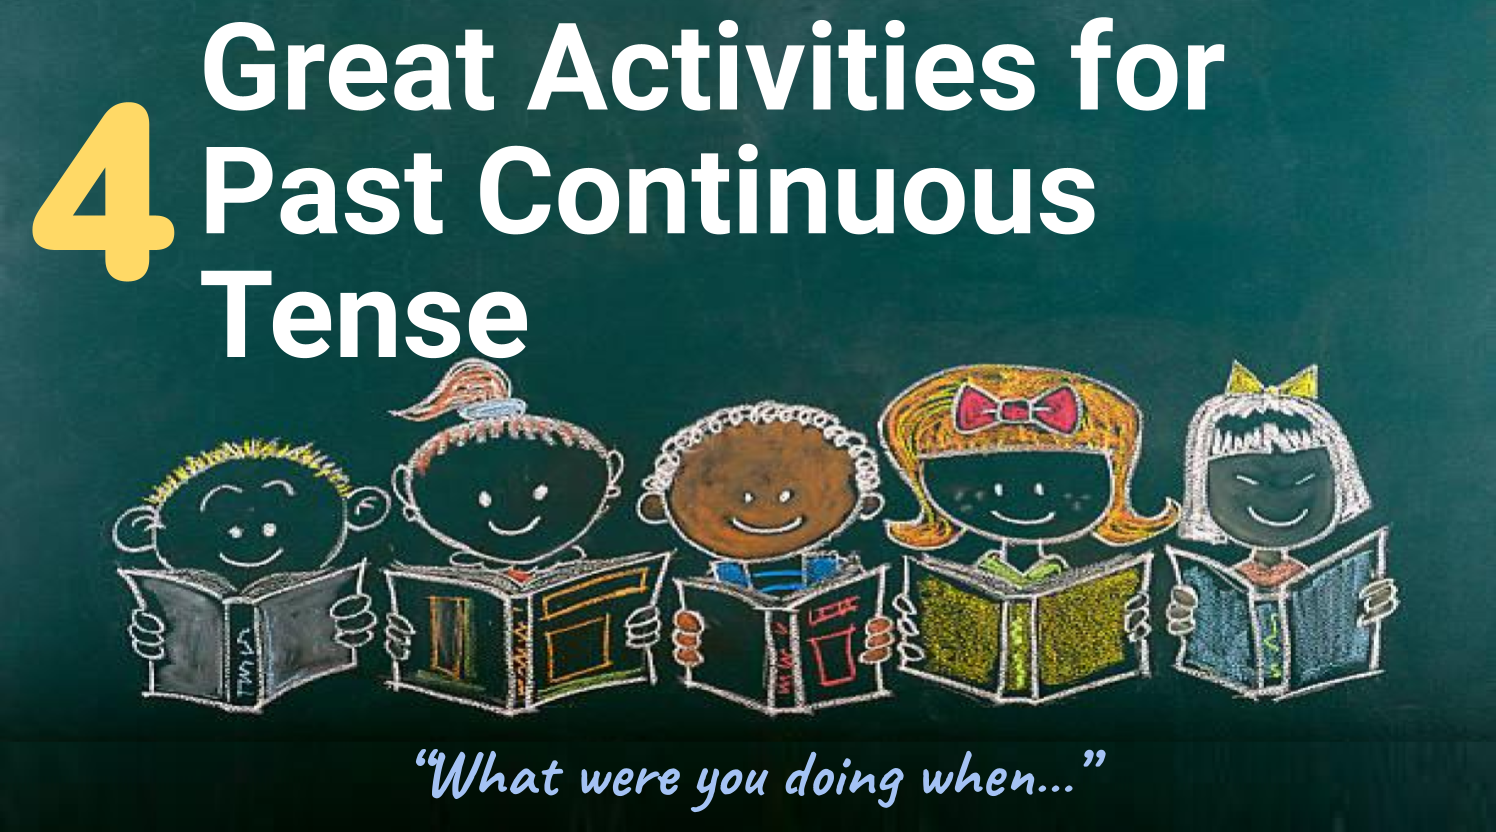 What Were You Doing When? 4 Great Activities for Past Continuous Tense